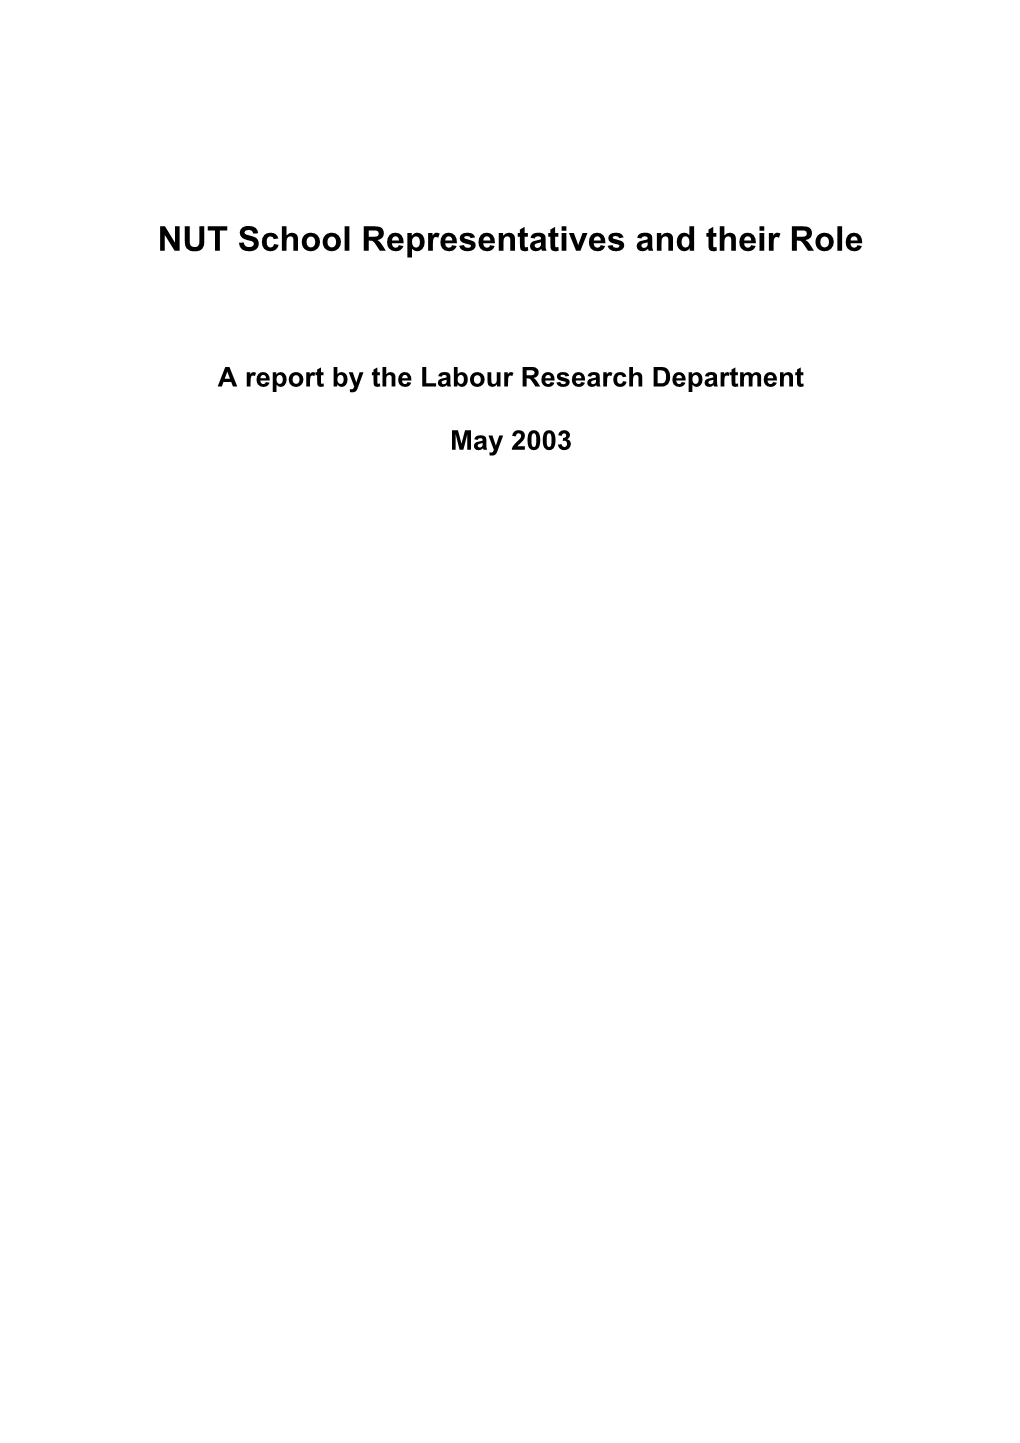 NUT School Representatives and Their Role